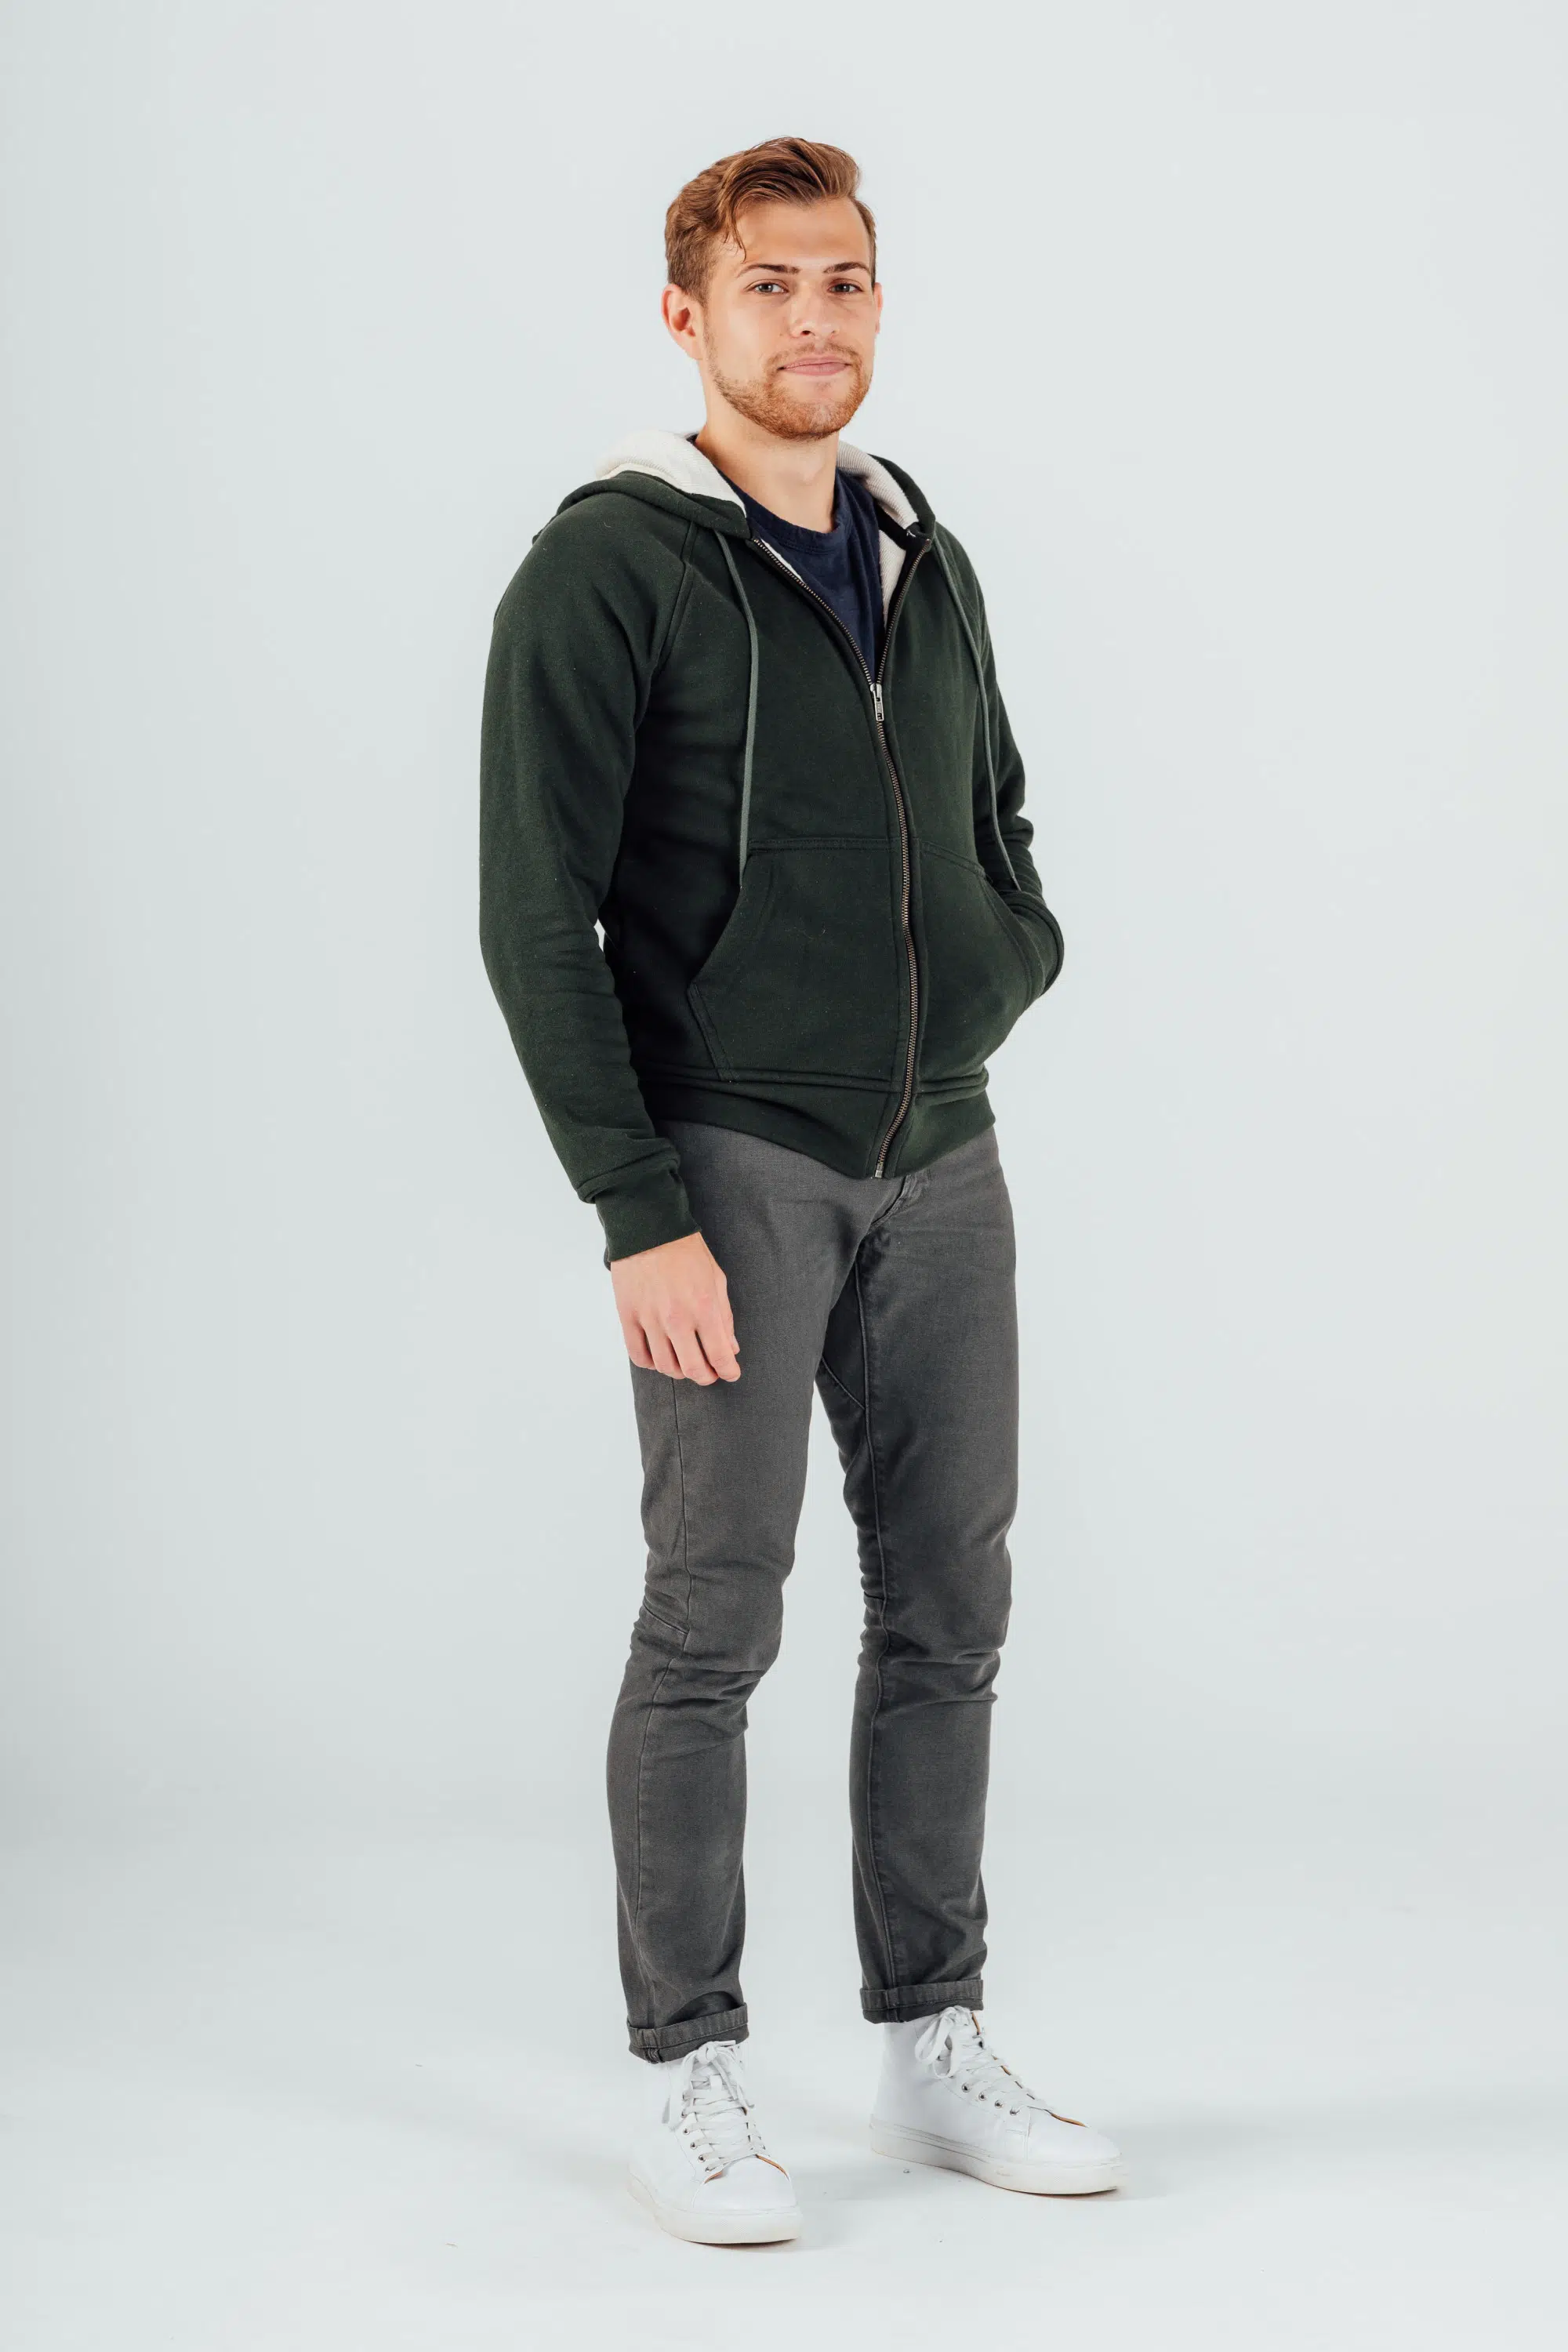 Huckberry 10 Year Waffle lined Hoodie